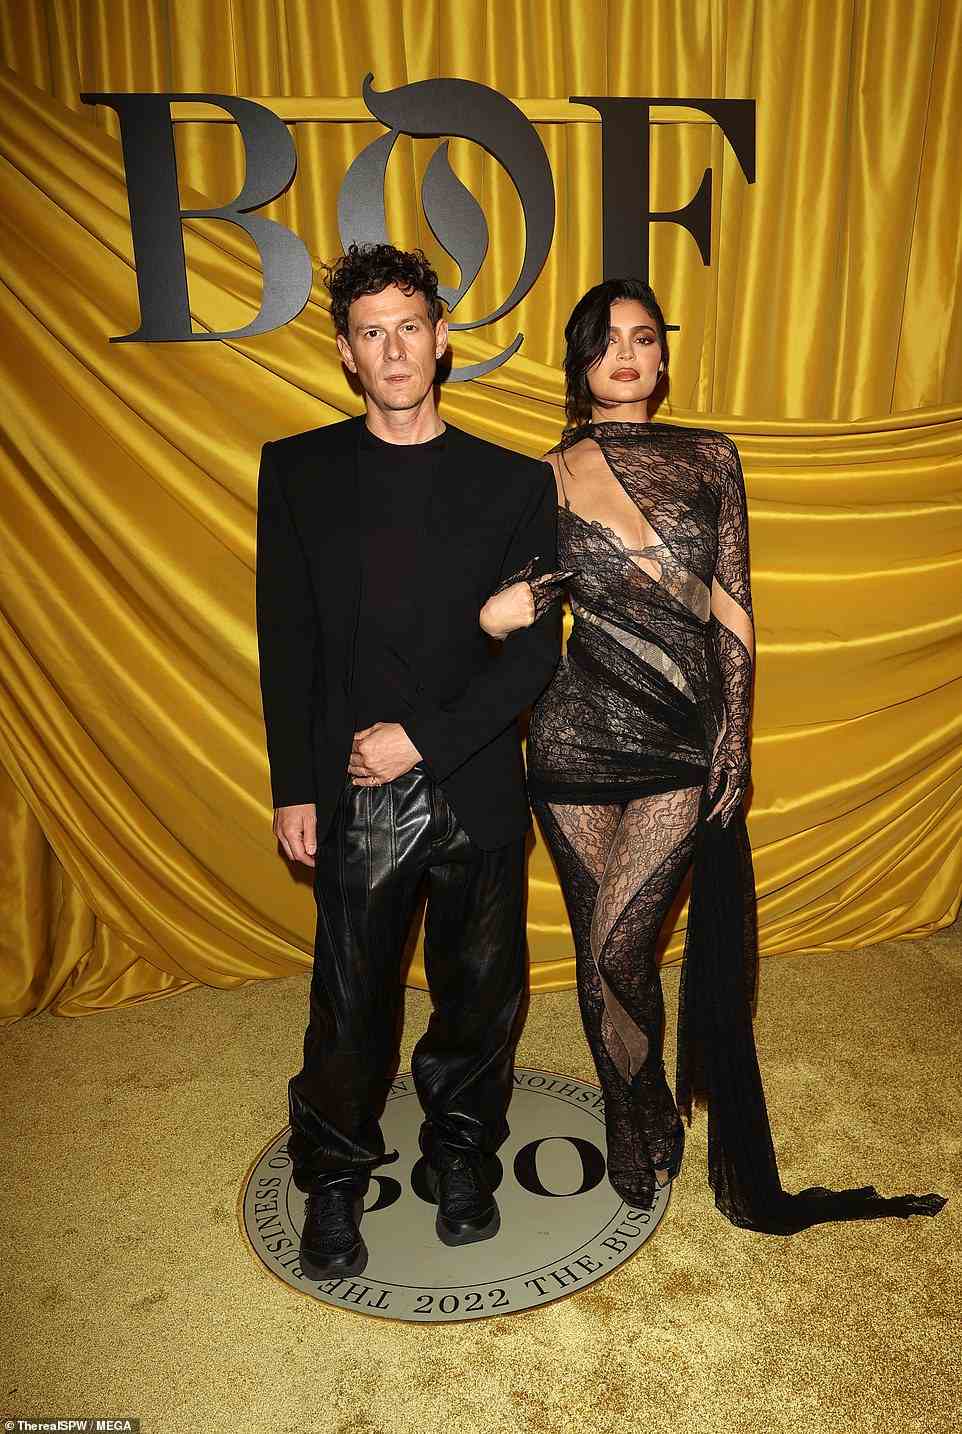 Pals: She posed on the carpet with a pal who was dressed in black for the evening